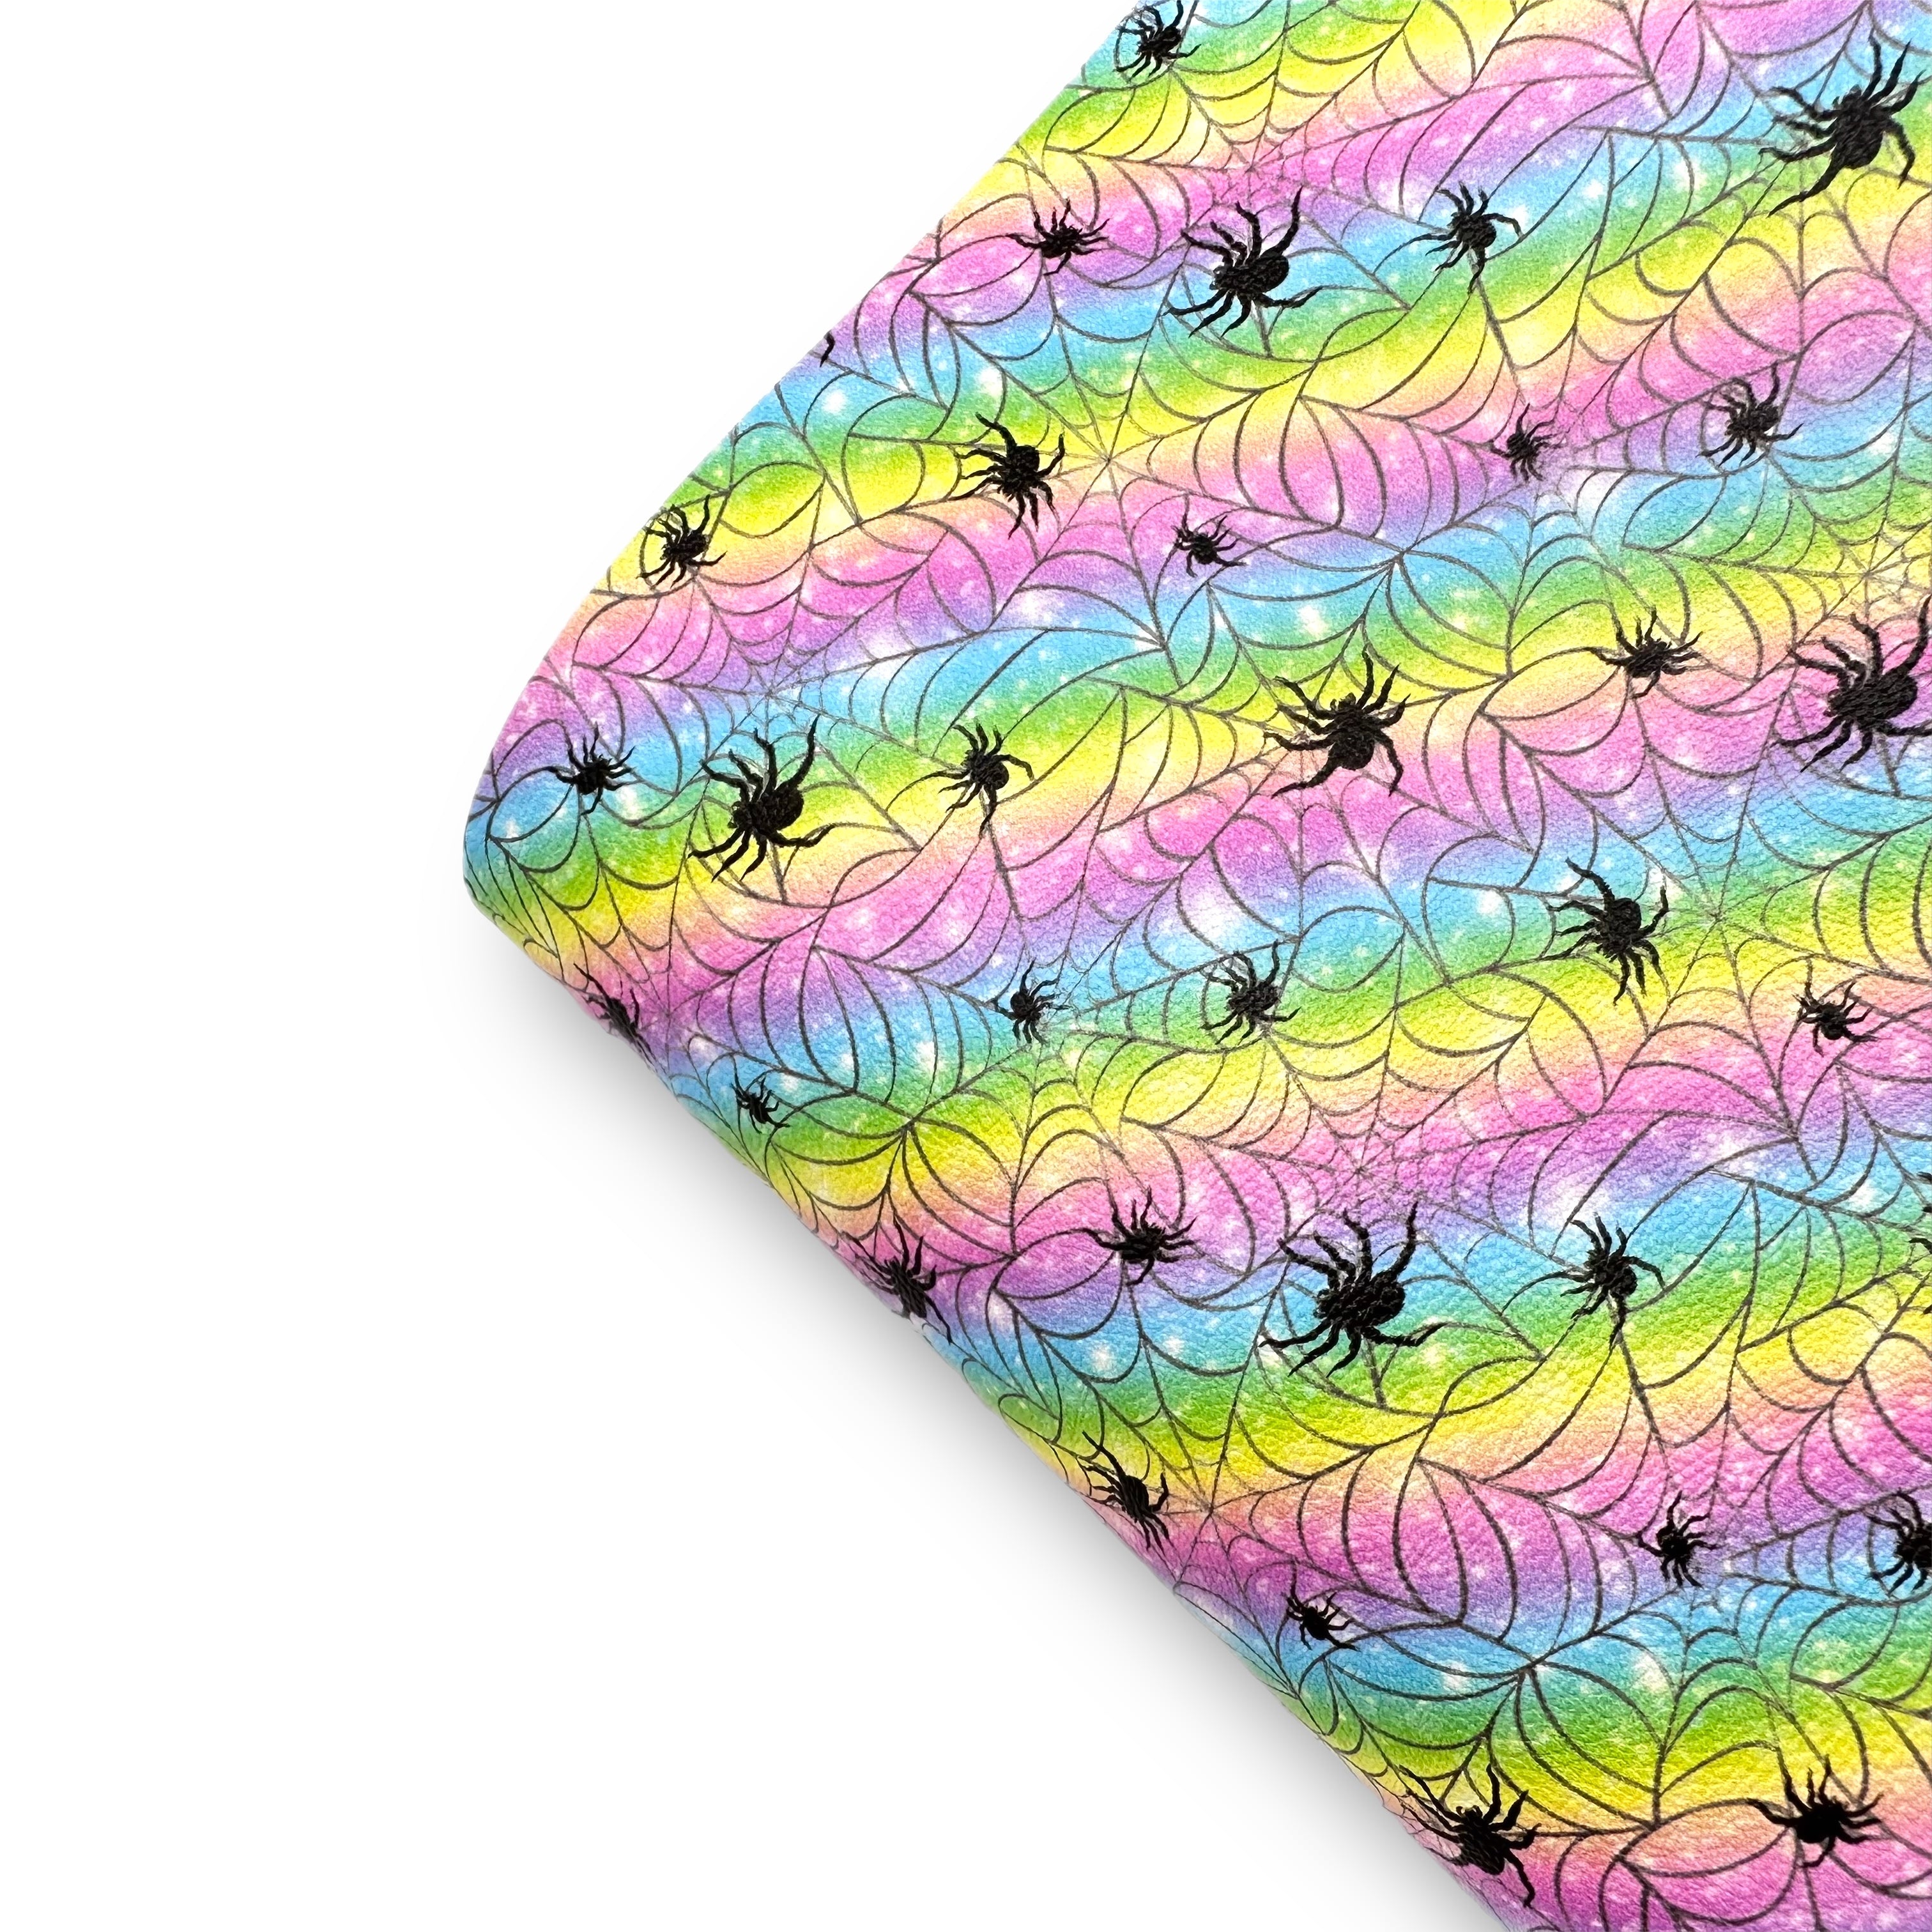 Pastel Rainbow Spider Webs Premium Faux Leather Fabric Sheets